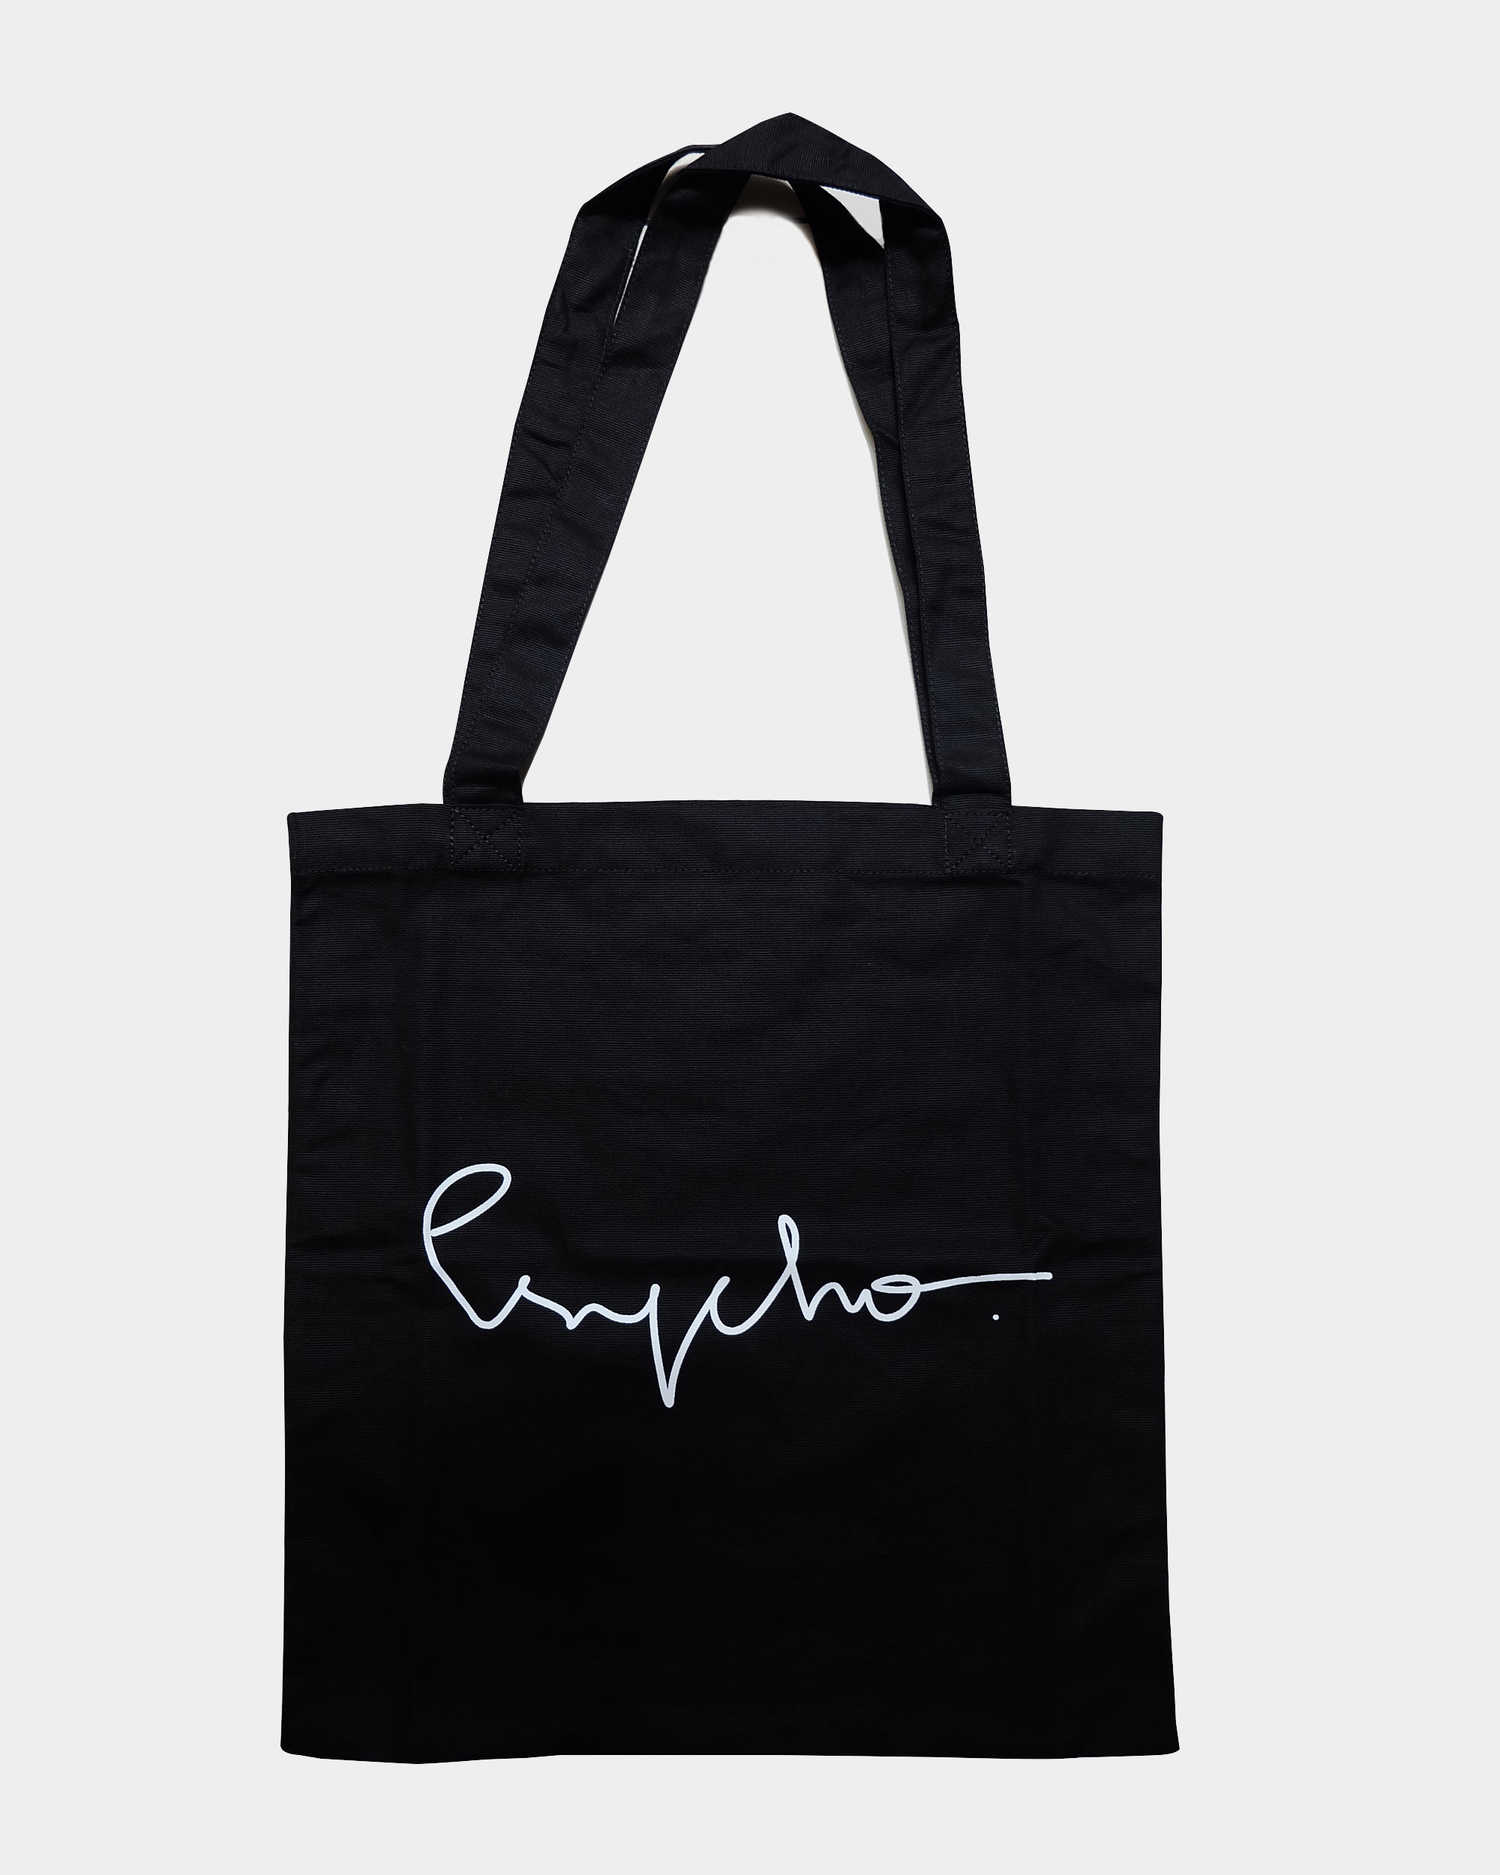 Product Home + Gifts - Home & Gifts - Psycho Tote Bag Black | Monstore